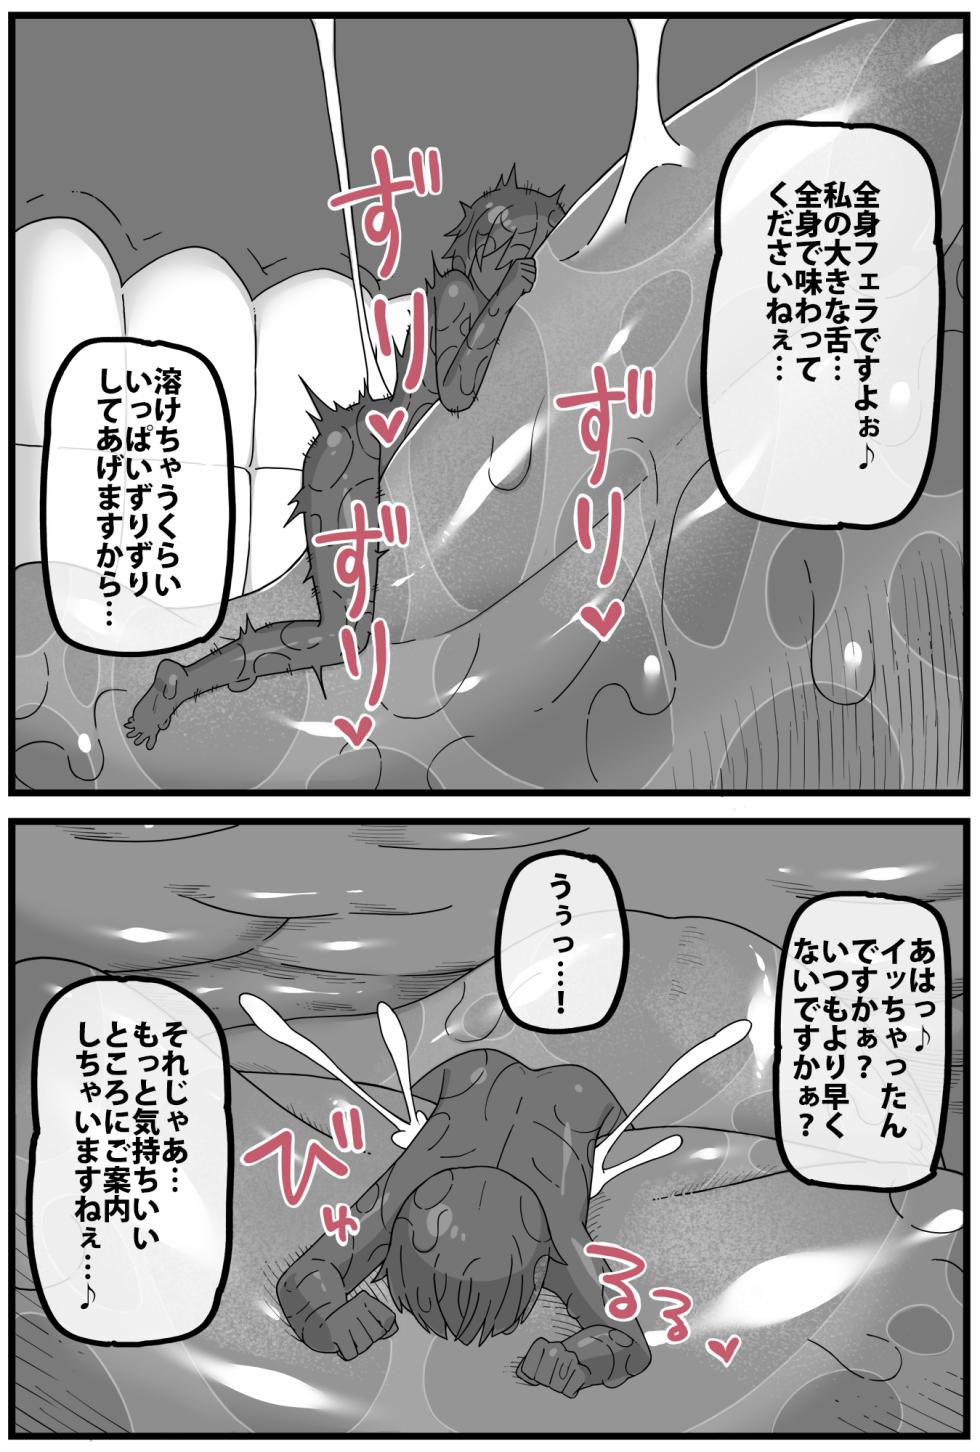 [Shiheki] Short cartoon about a brothel that swallows whole - Page 3